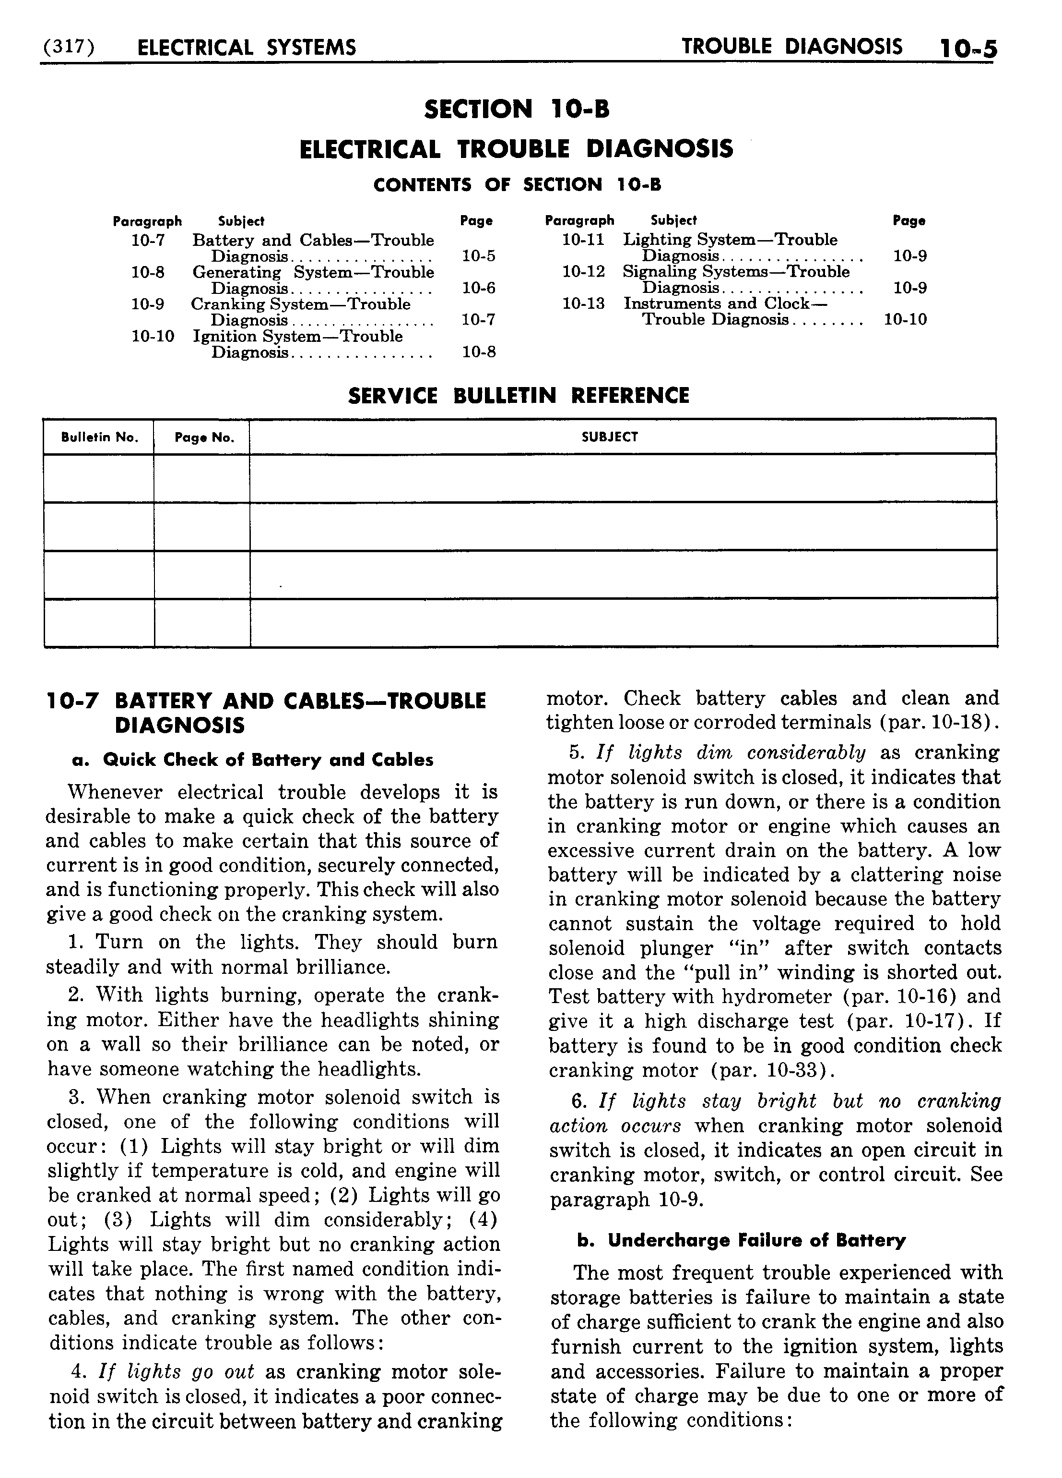 n_11 1954 Buick Shop Manual - Electrical Systems-005-005.jpg